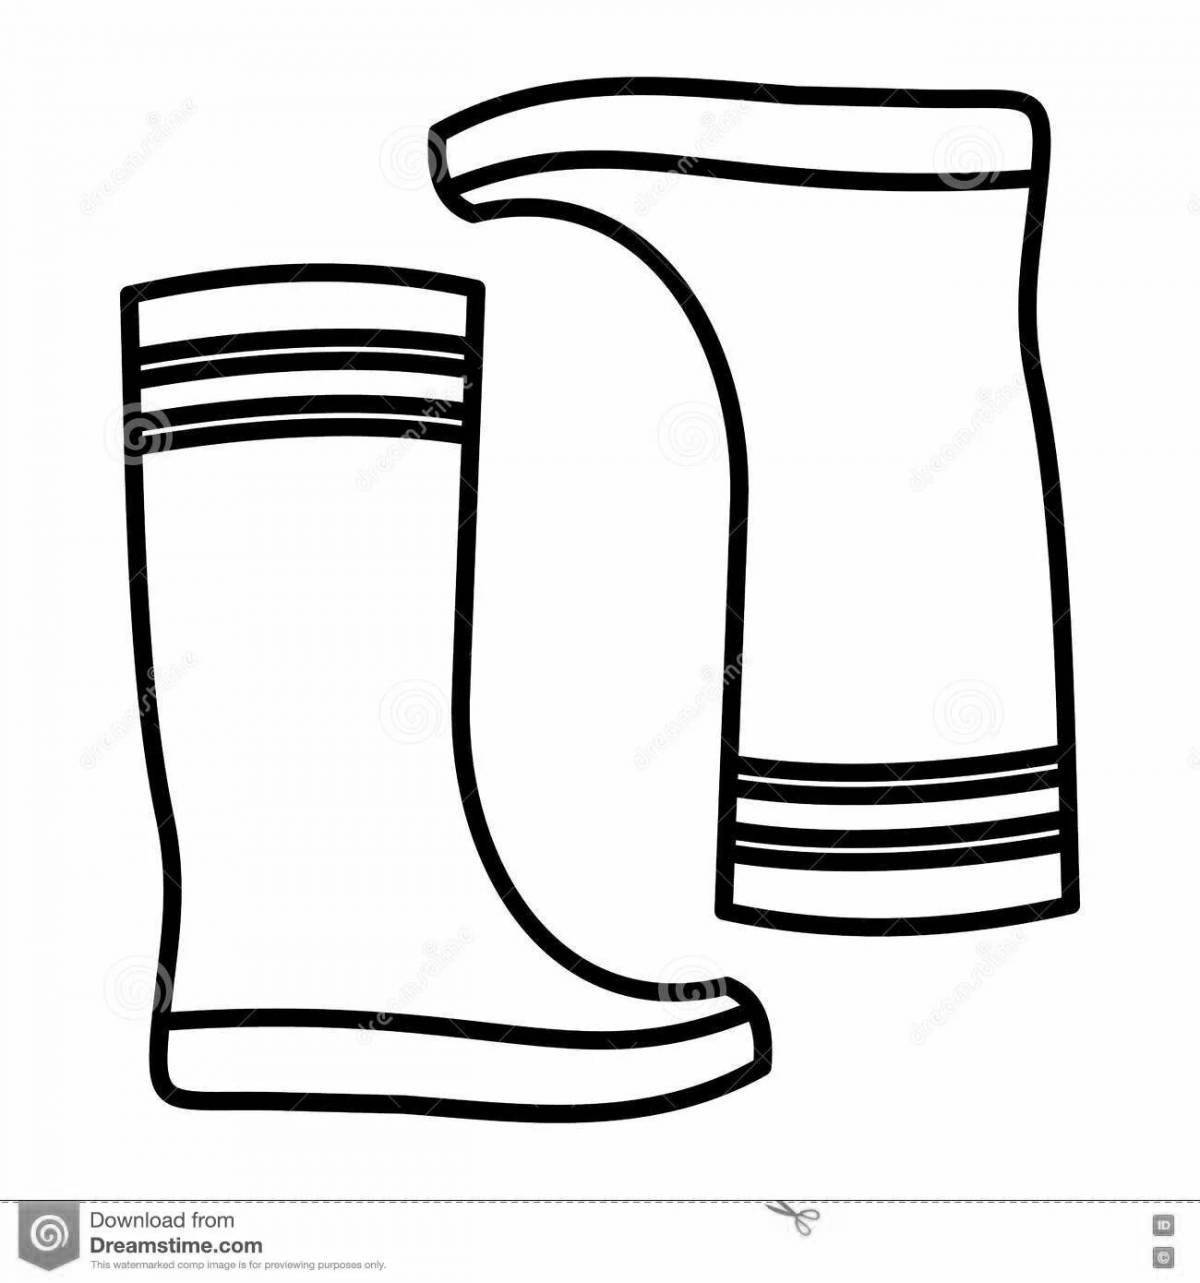 Cute rubber boots coloring page